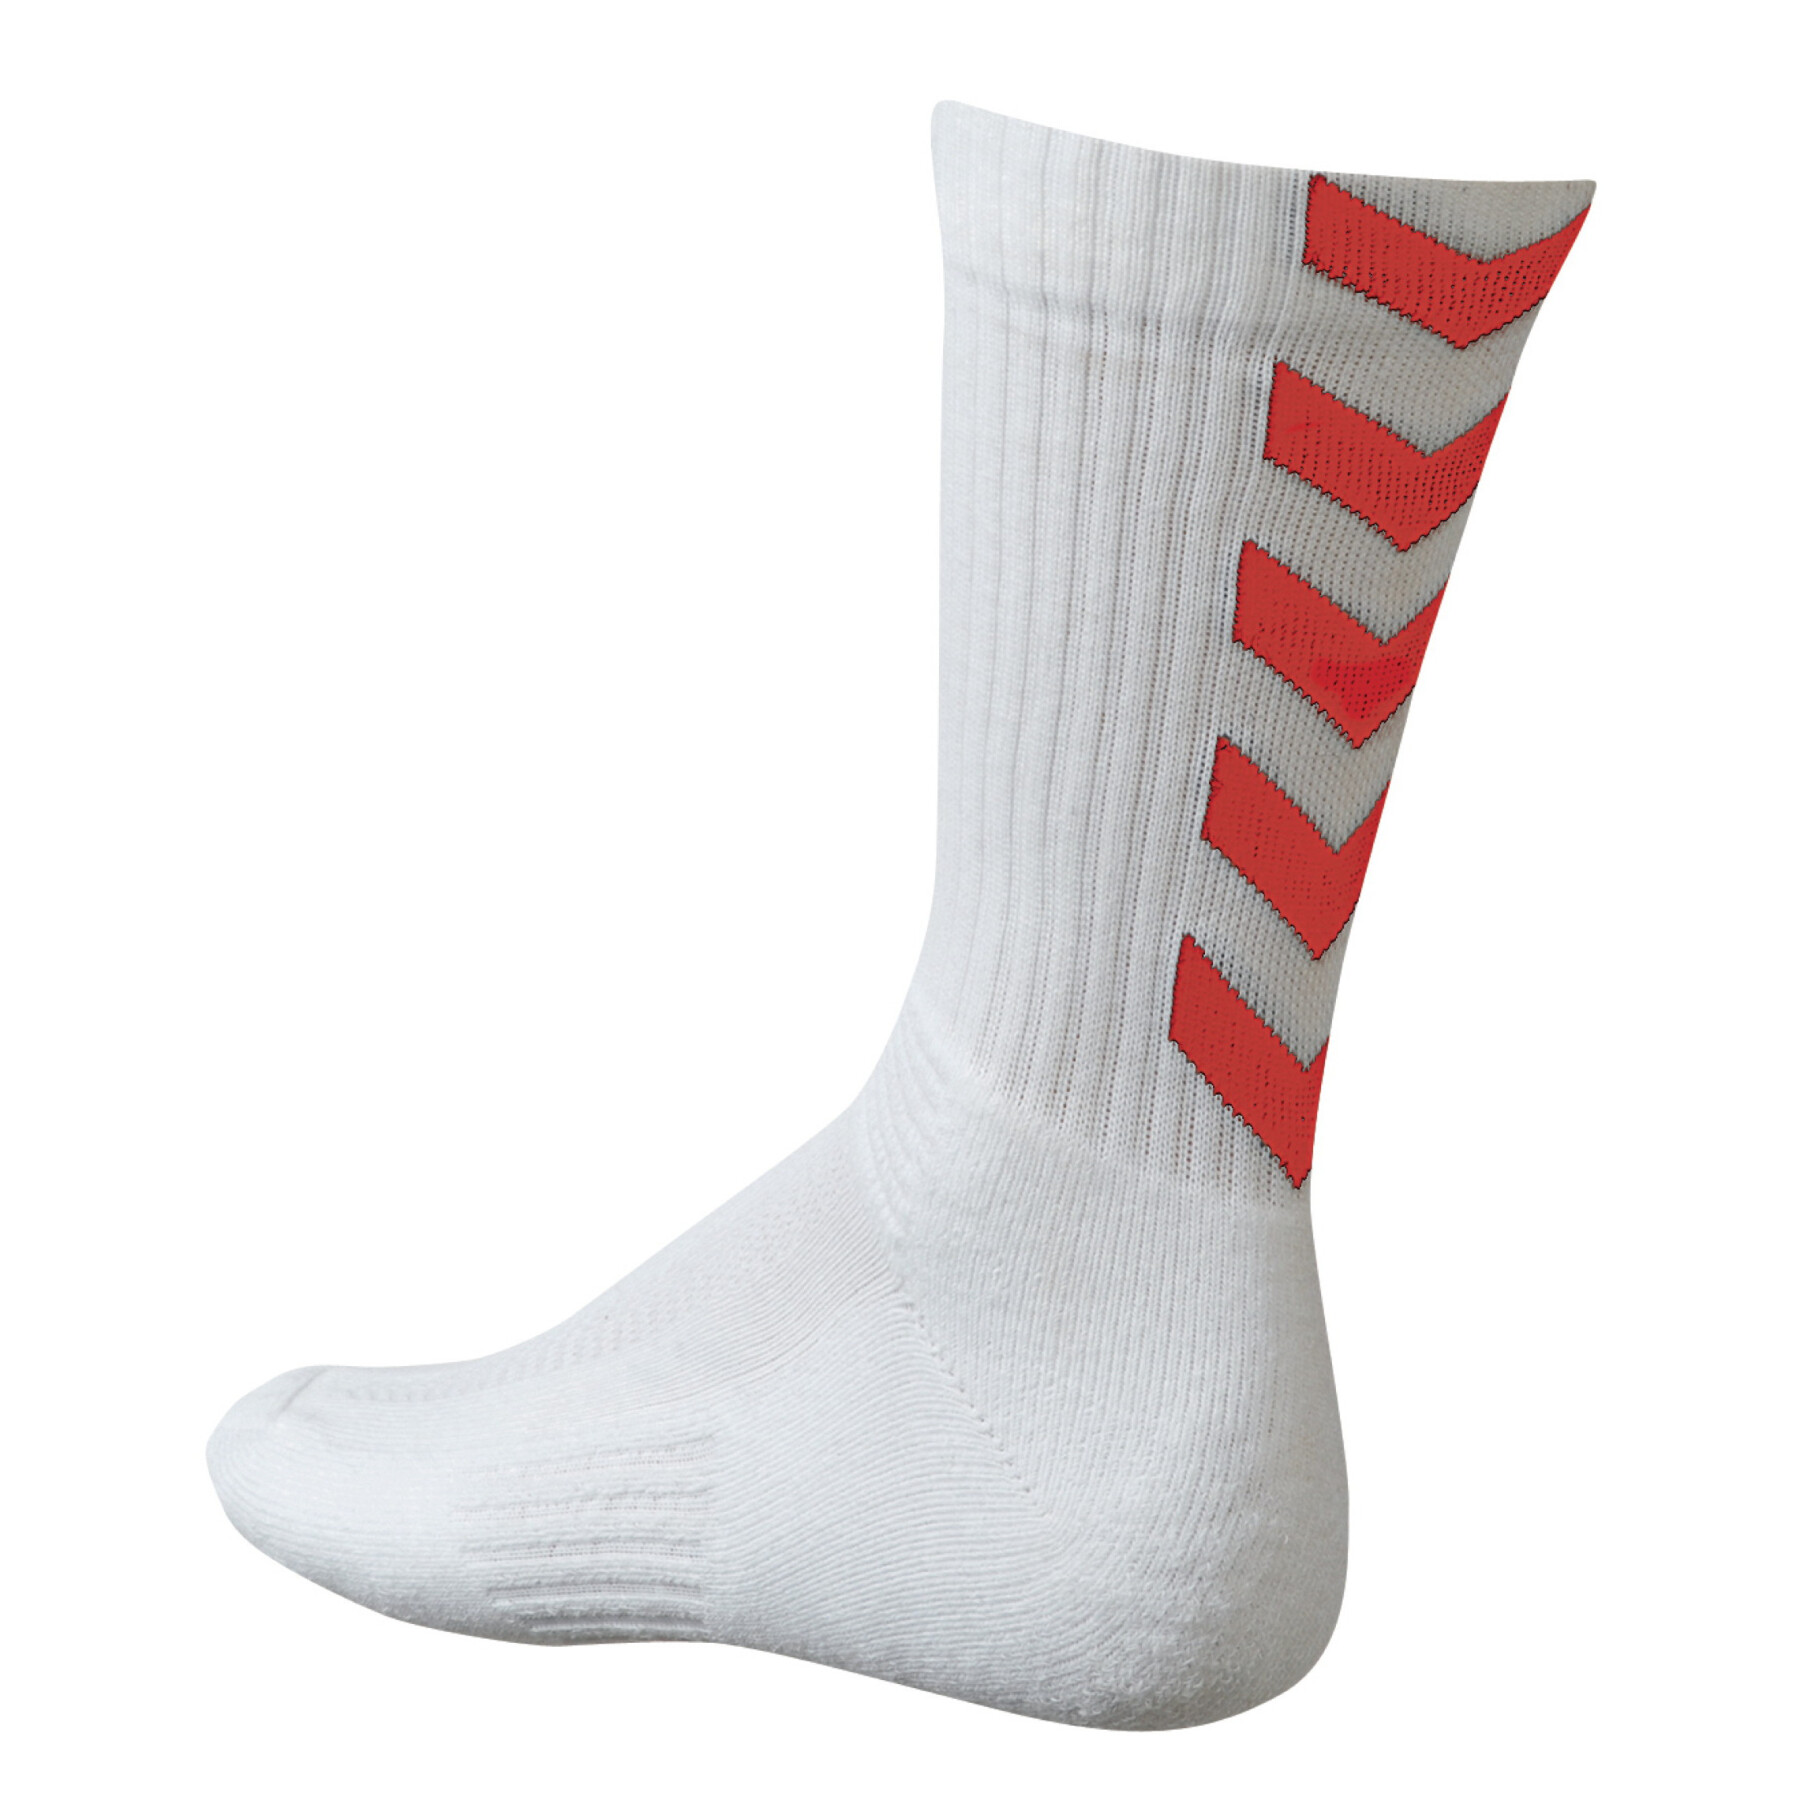 Chaussettes Hummel hmlAUTHENTIC Indoor - Blanc / Rouge